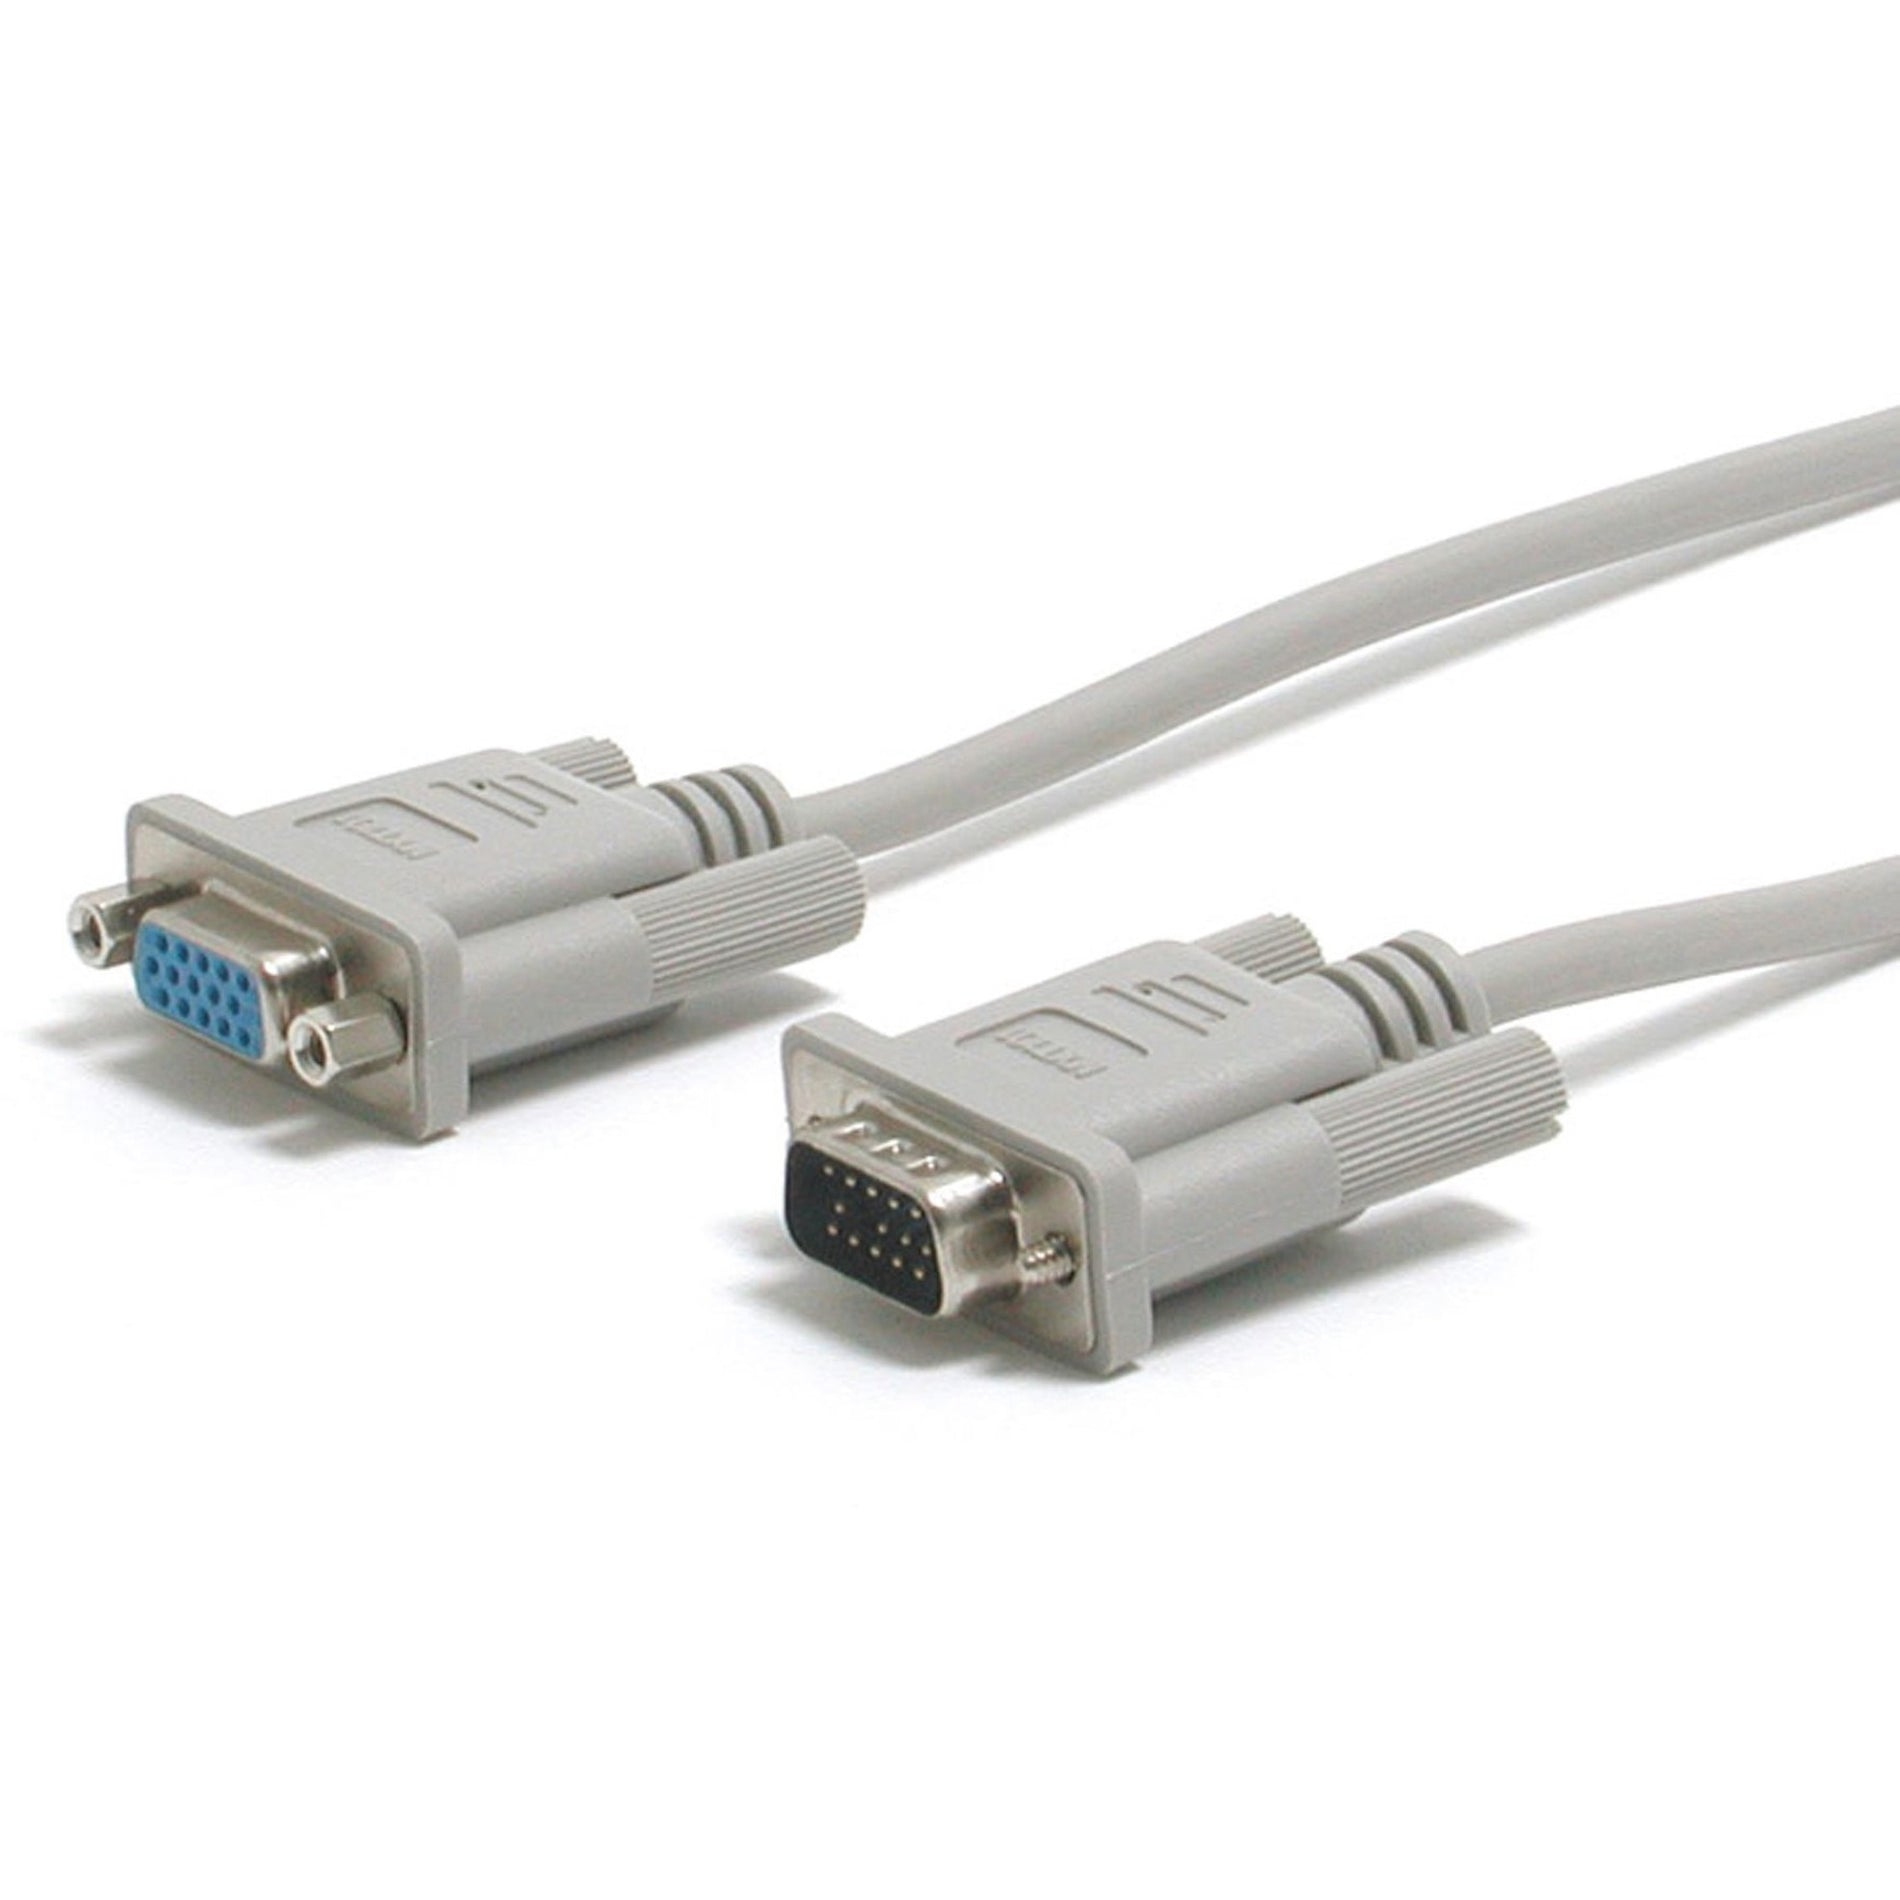 StarTech.com MXT101 10 ft VGA Monitor Extension Cable, HD15 M/F